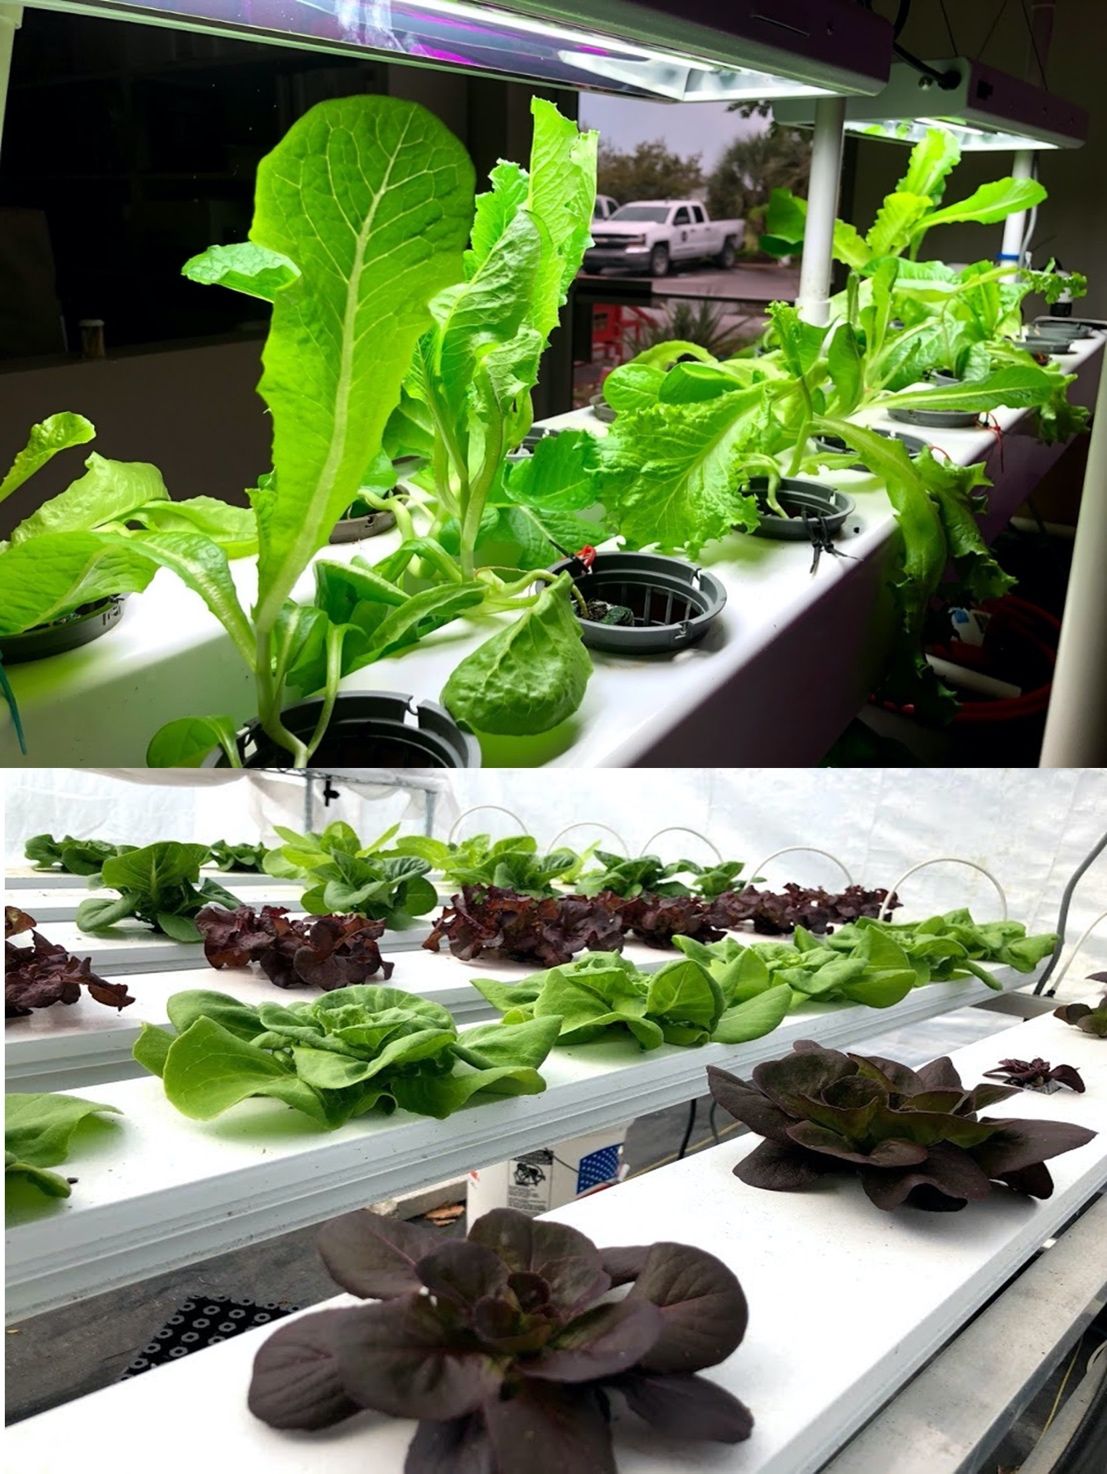 Two NFT systems to grow lettuce in small settings. The systems are prefabricated and can be purchased.